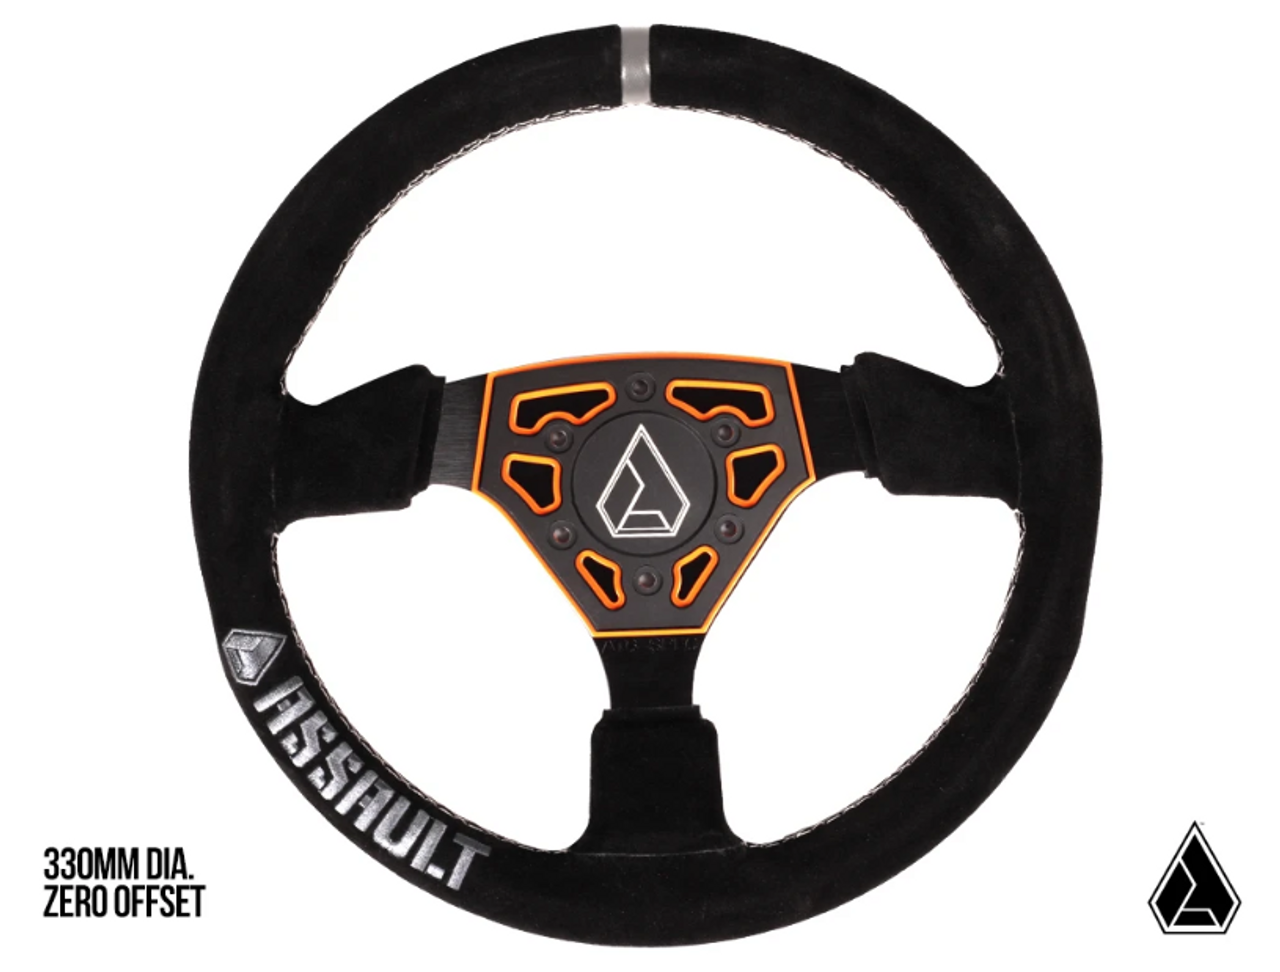 An image of the Polaris Ranger XP 1000 Navigator Suede Steering Wheel by Assault Industries, pictured uninstalled and against a blank background with a small logo in the bottom right corner of the image and the words "330 MM DIA. Zero offset" in the bottom left corner.